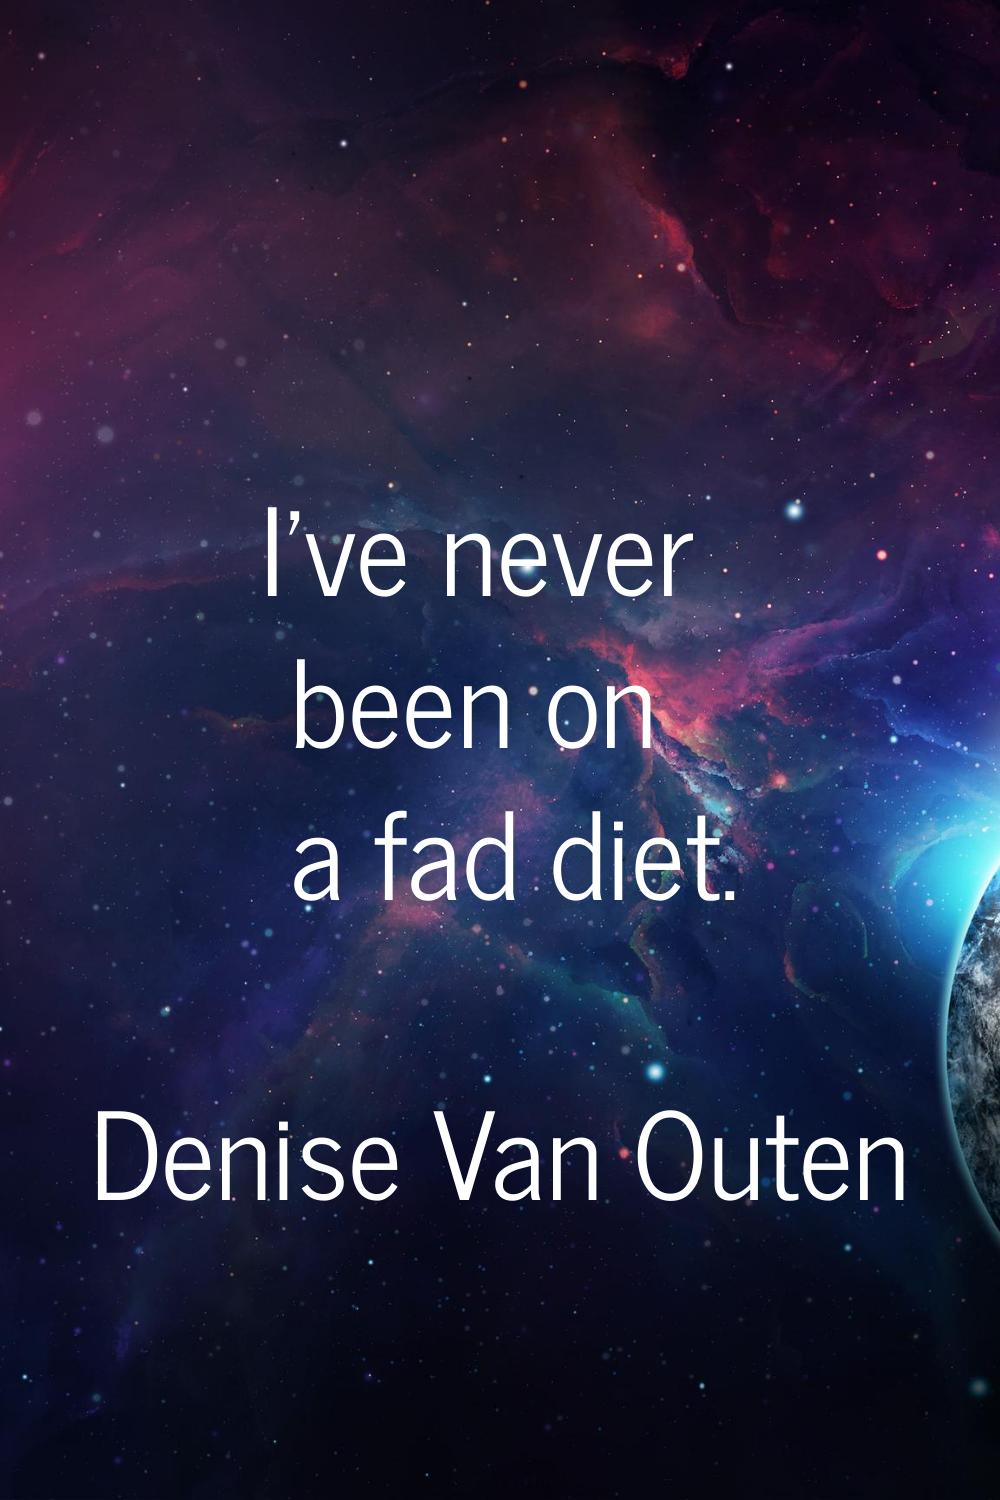 I've never been on a fad diet.